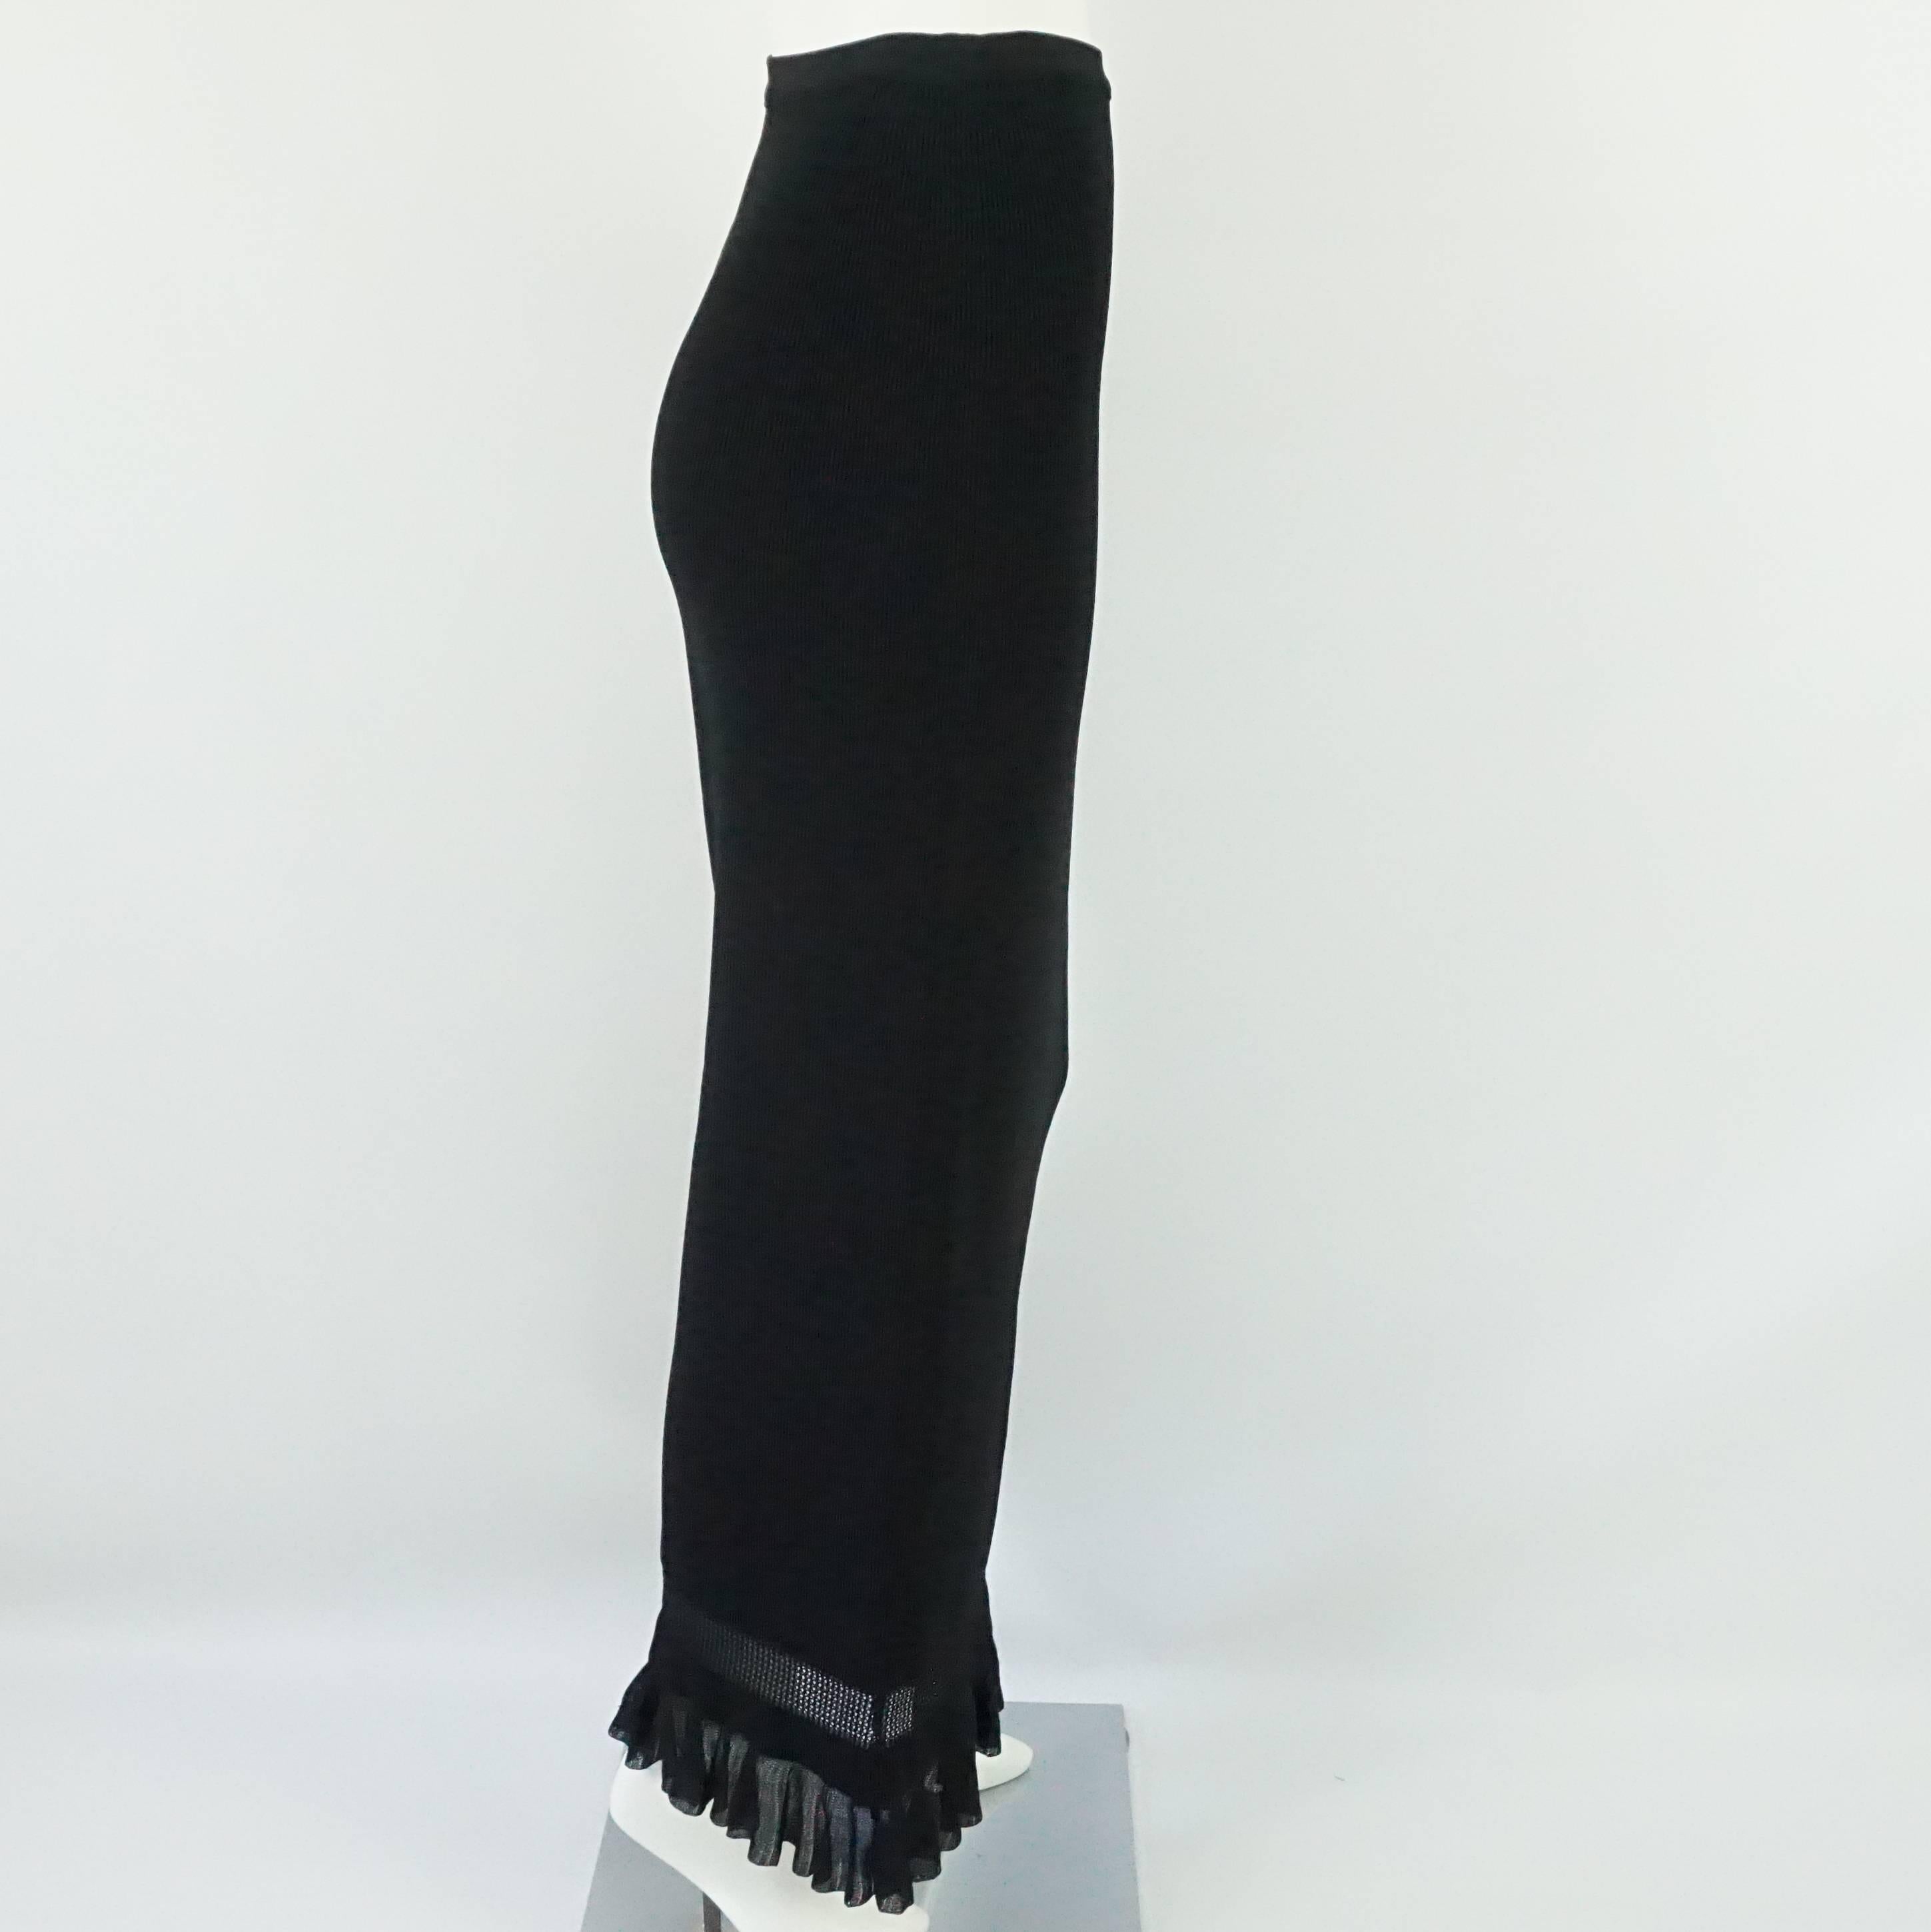 Alaia Black Knit Long Skirt w/ ruffle bottom-38  This fabulous and classic Alaia long knit skirt is in excellent condition. It has an elastic waistband and the bottom section of the skirt is a crochet style knit ruffle. 
Measurements:
Waist: